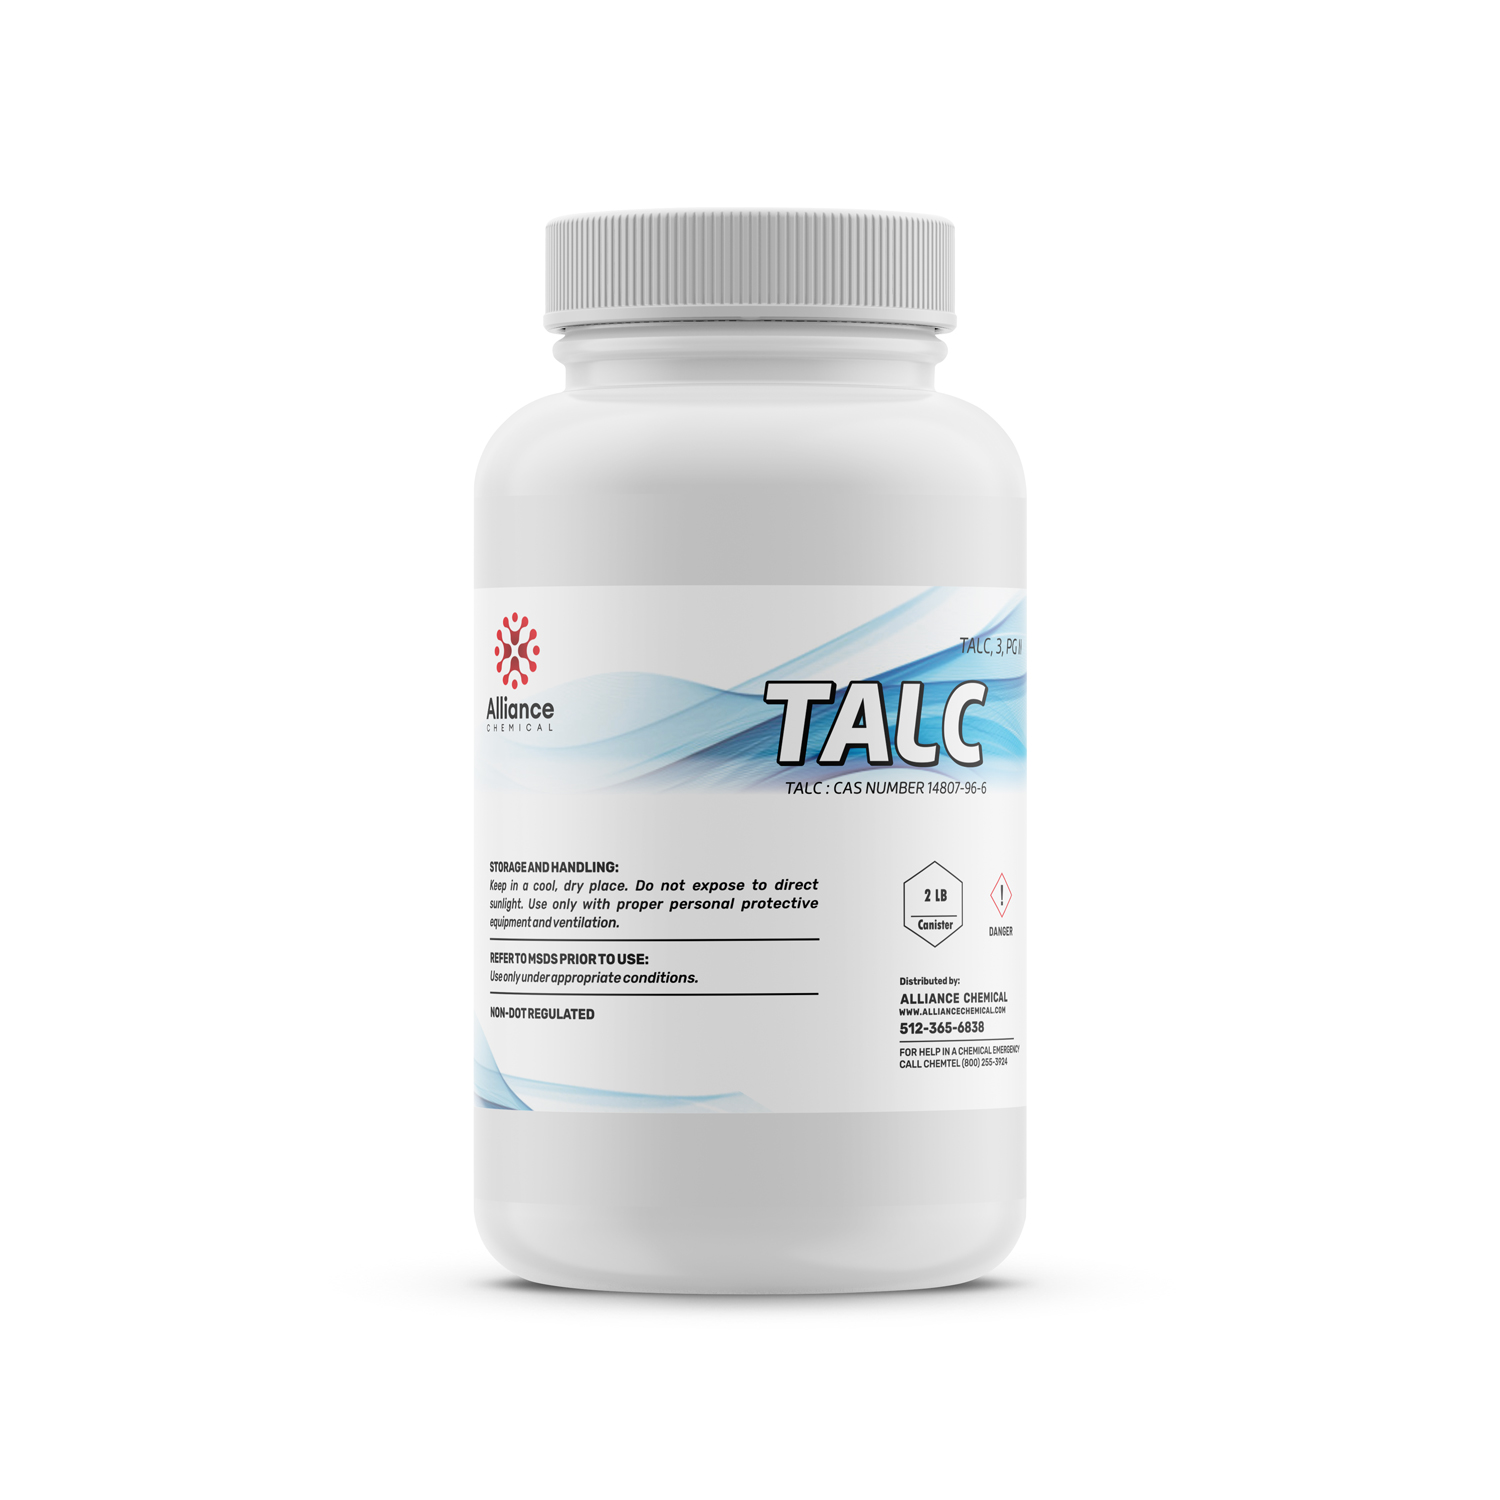 Talc: Mineral information, data and localities.